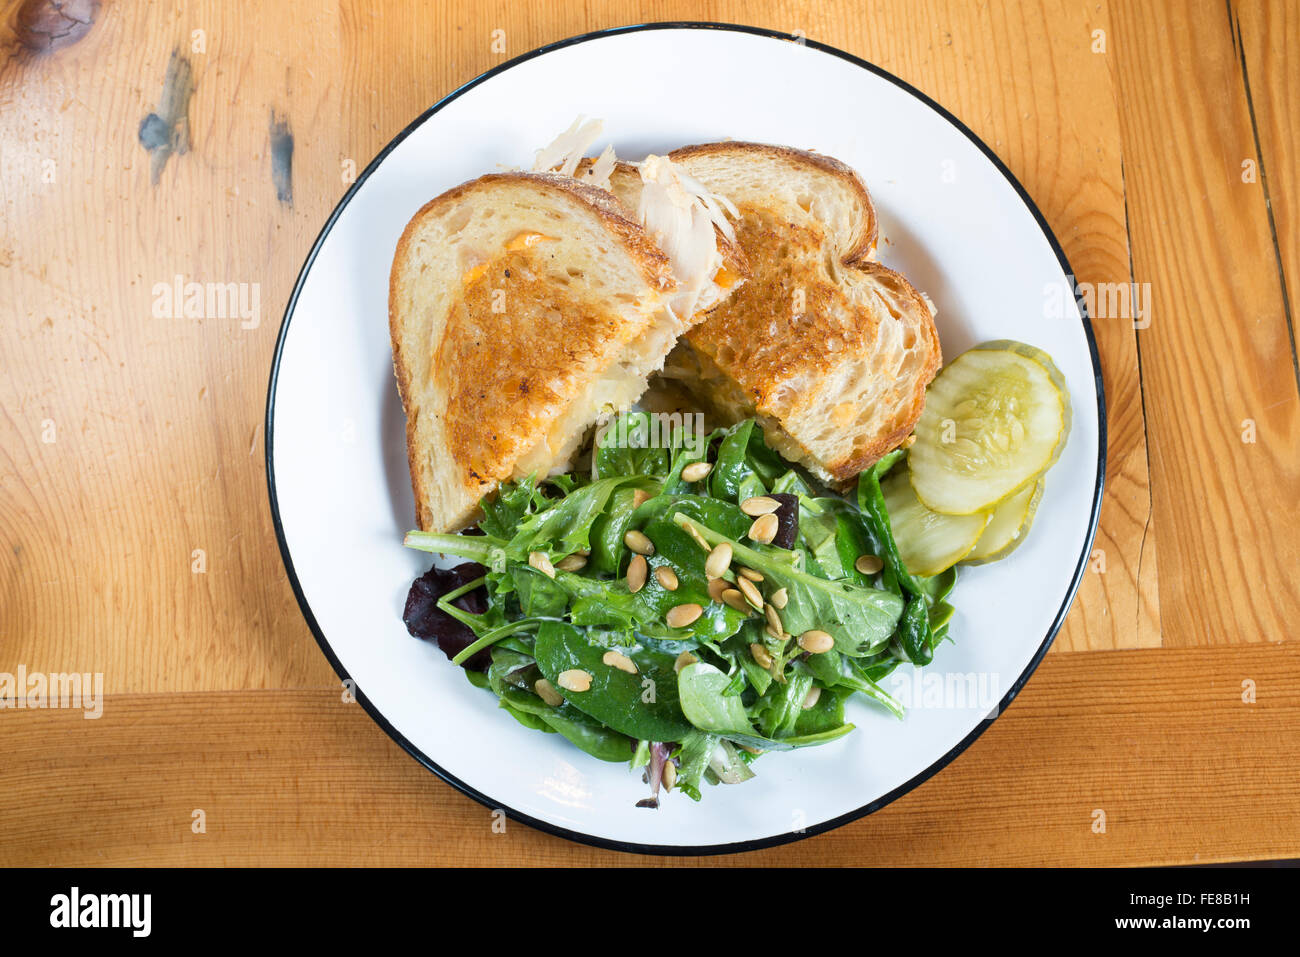 Turkey reuben sandwich and spinach salad at the Lostine Tavern, a farm to table restaurant in Lostine, Oregon. Stock Photo